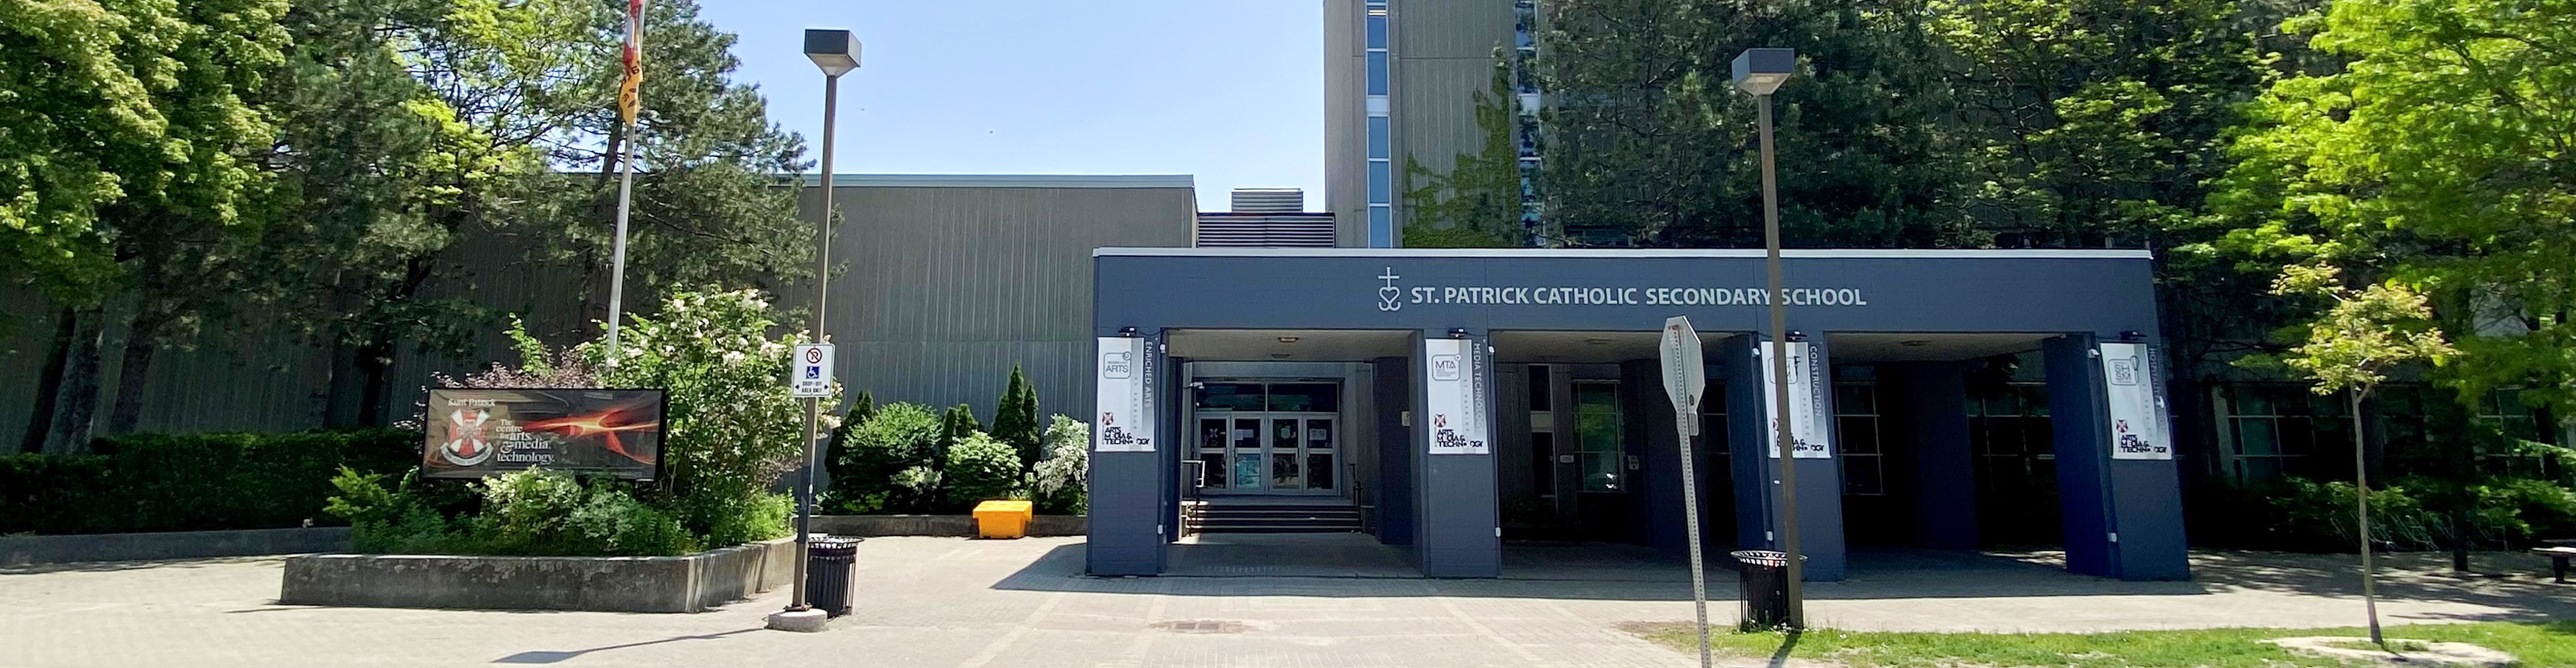 The front entrance of the St. Patrick Catholic Secondary School building.